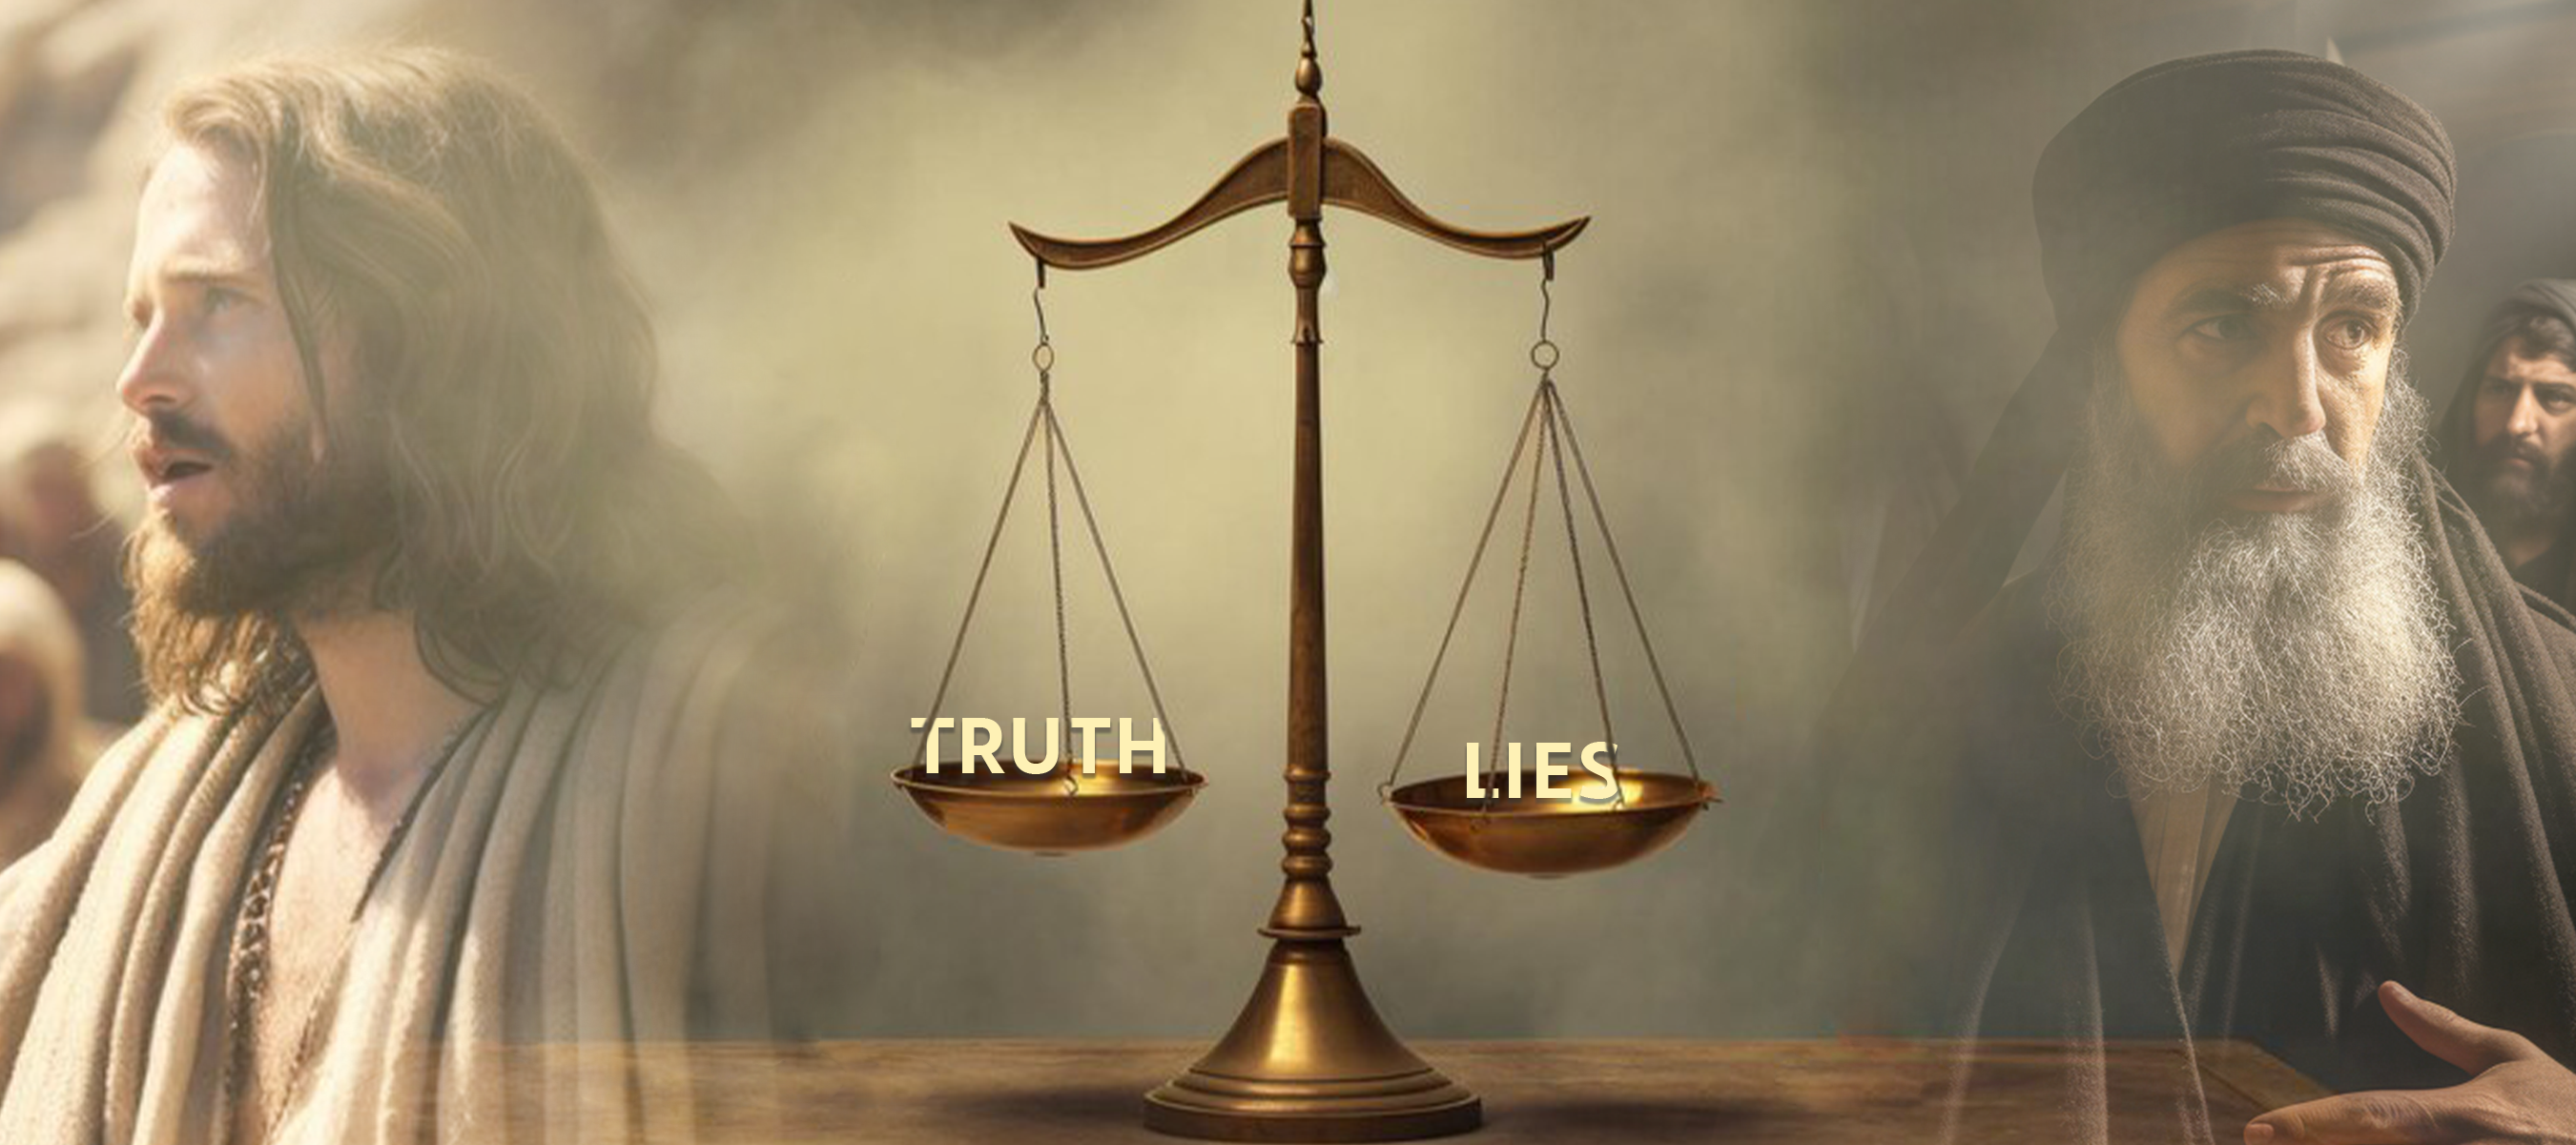 Truth vs lies article image